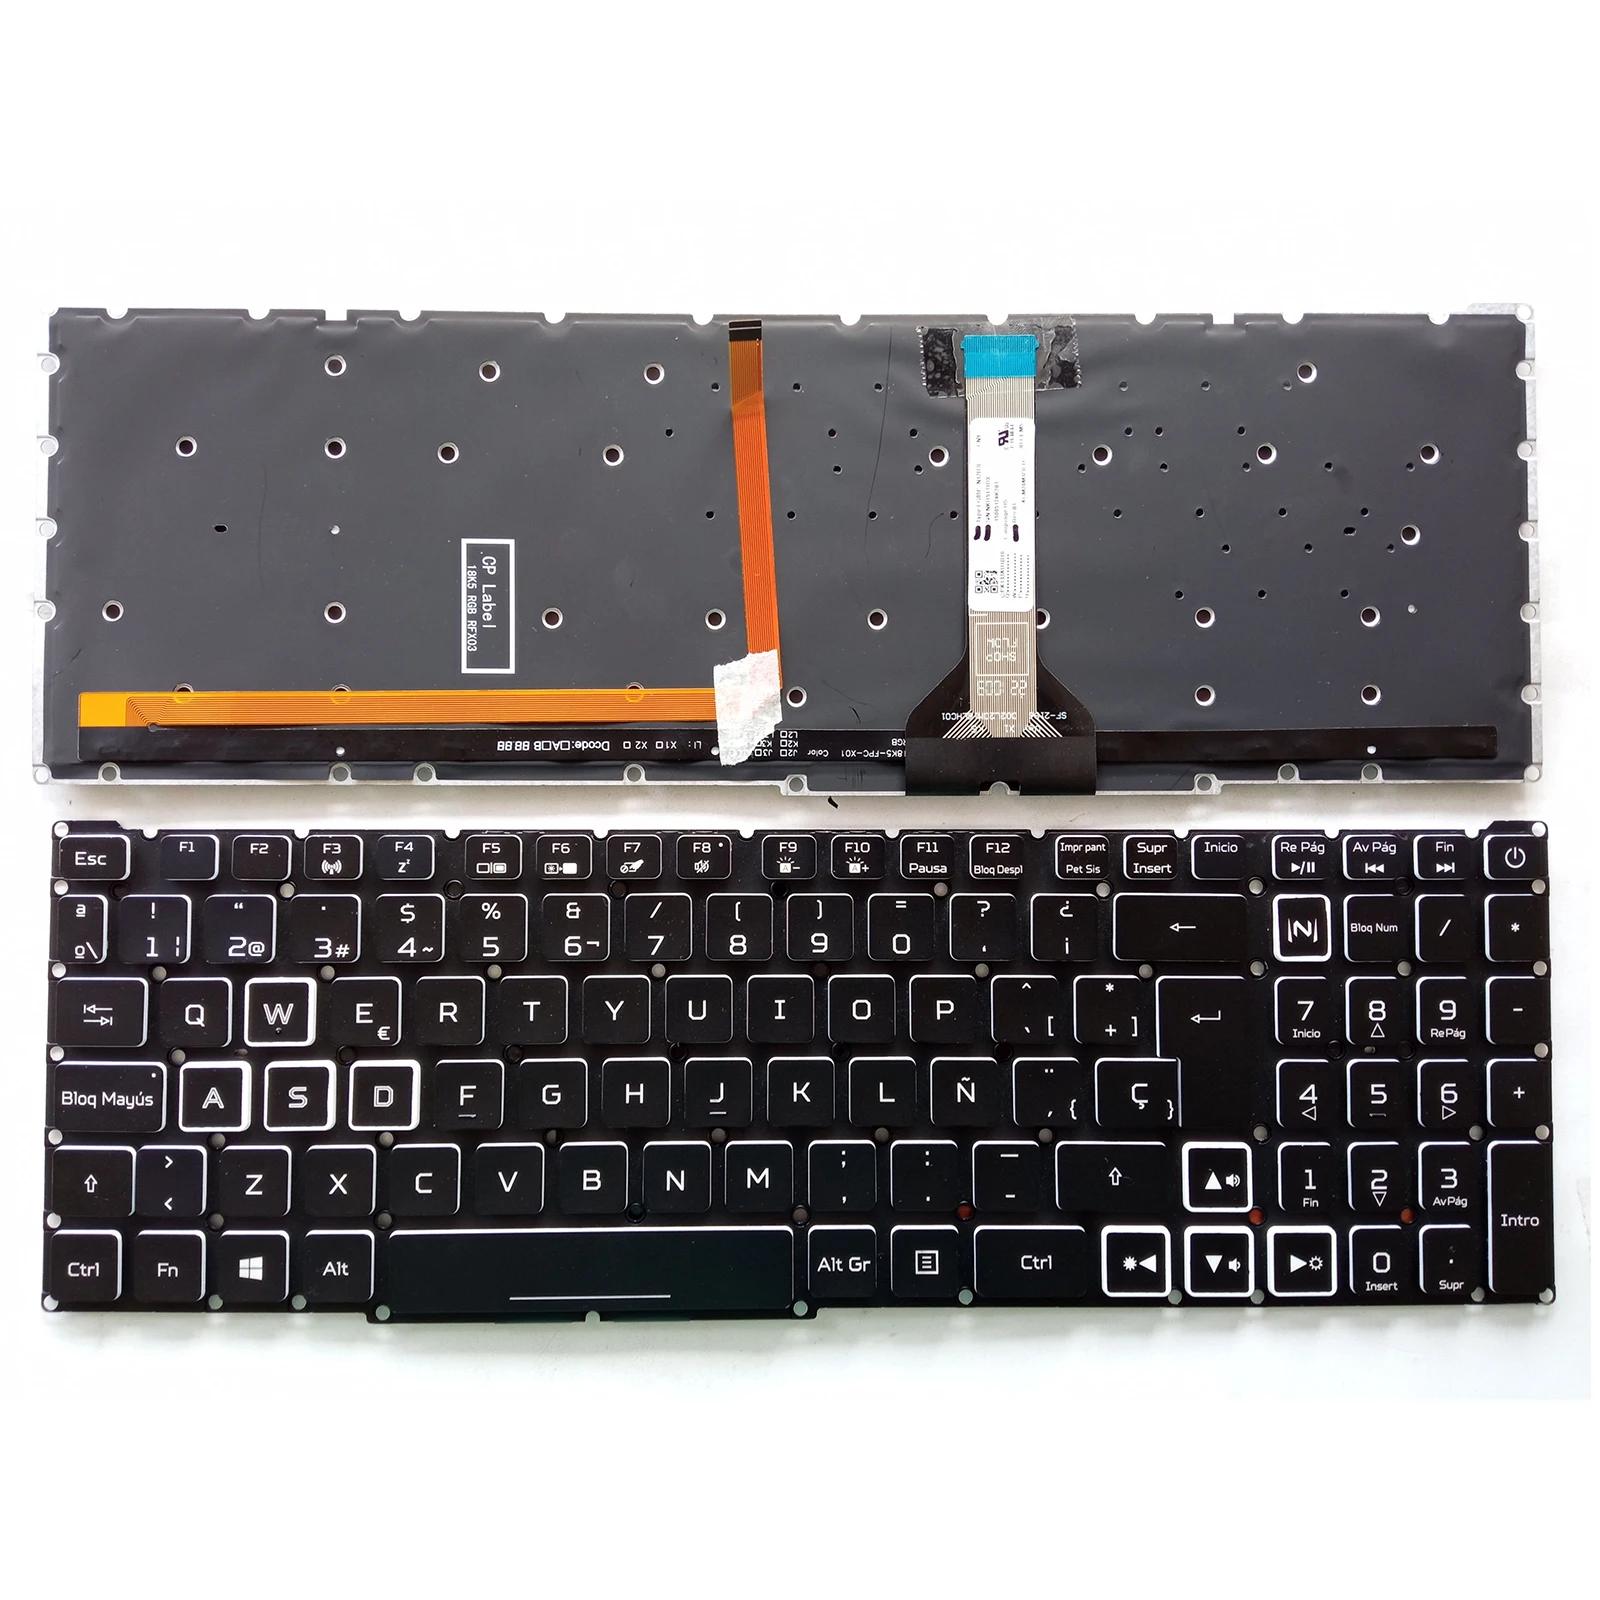 

New SP RGB Colorful Backlit Keyboard For Acer Nitro 5 AN515-56 AN515-57 laptop